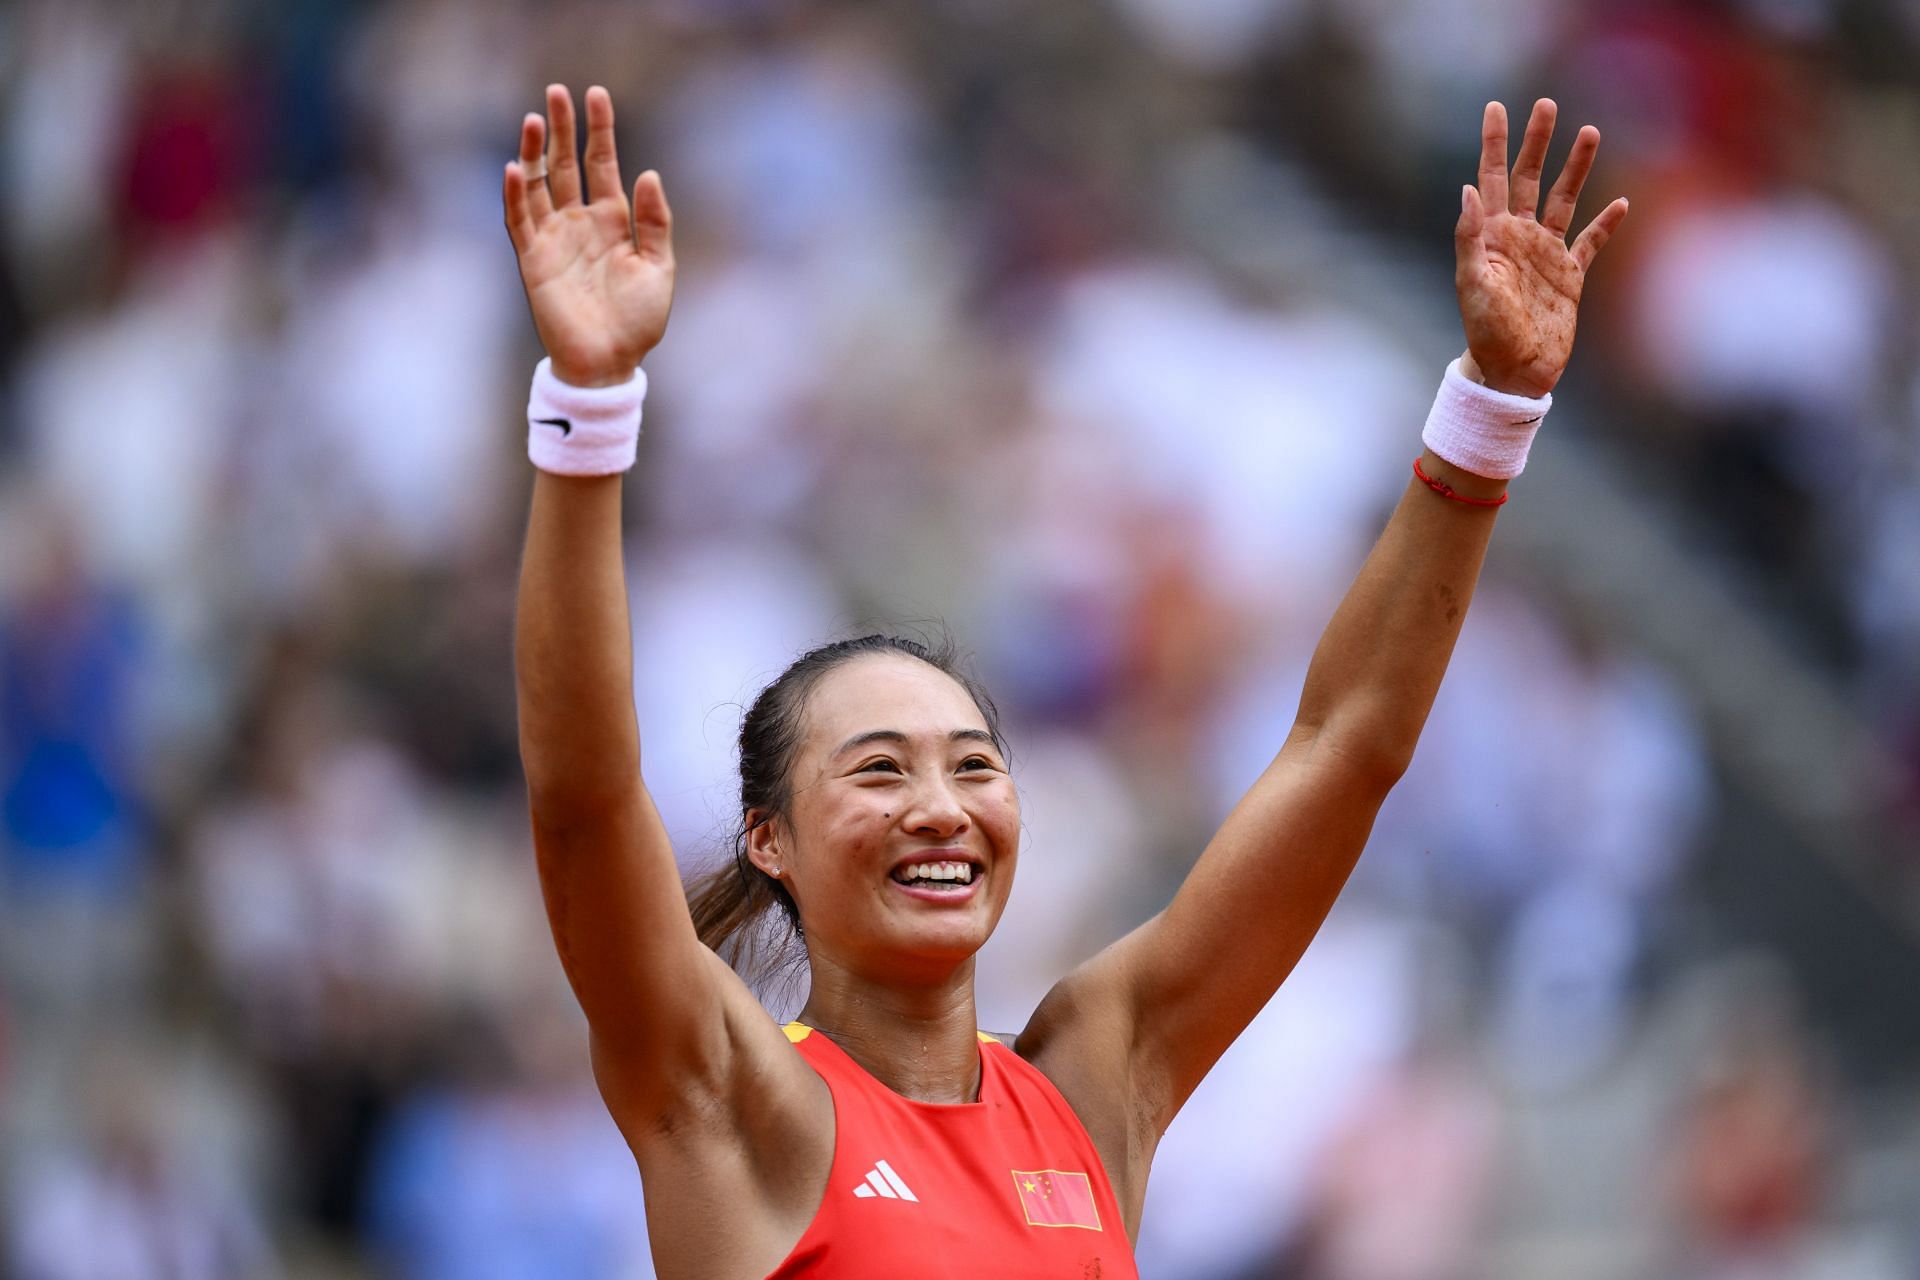 PICTURE: Zheng Qinwen falls to the ground in elation after scripting history as first Chinese tennis player to reach Olympic final at Paris 2024